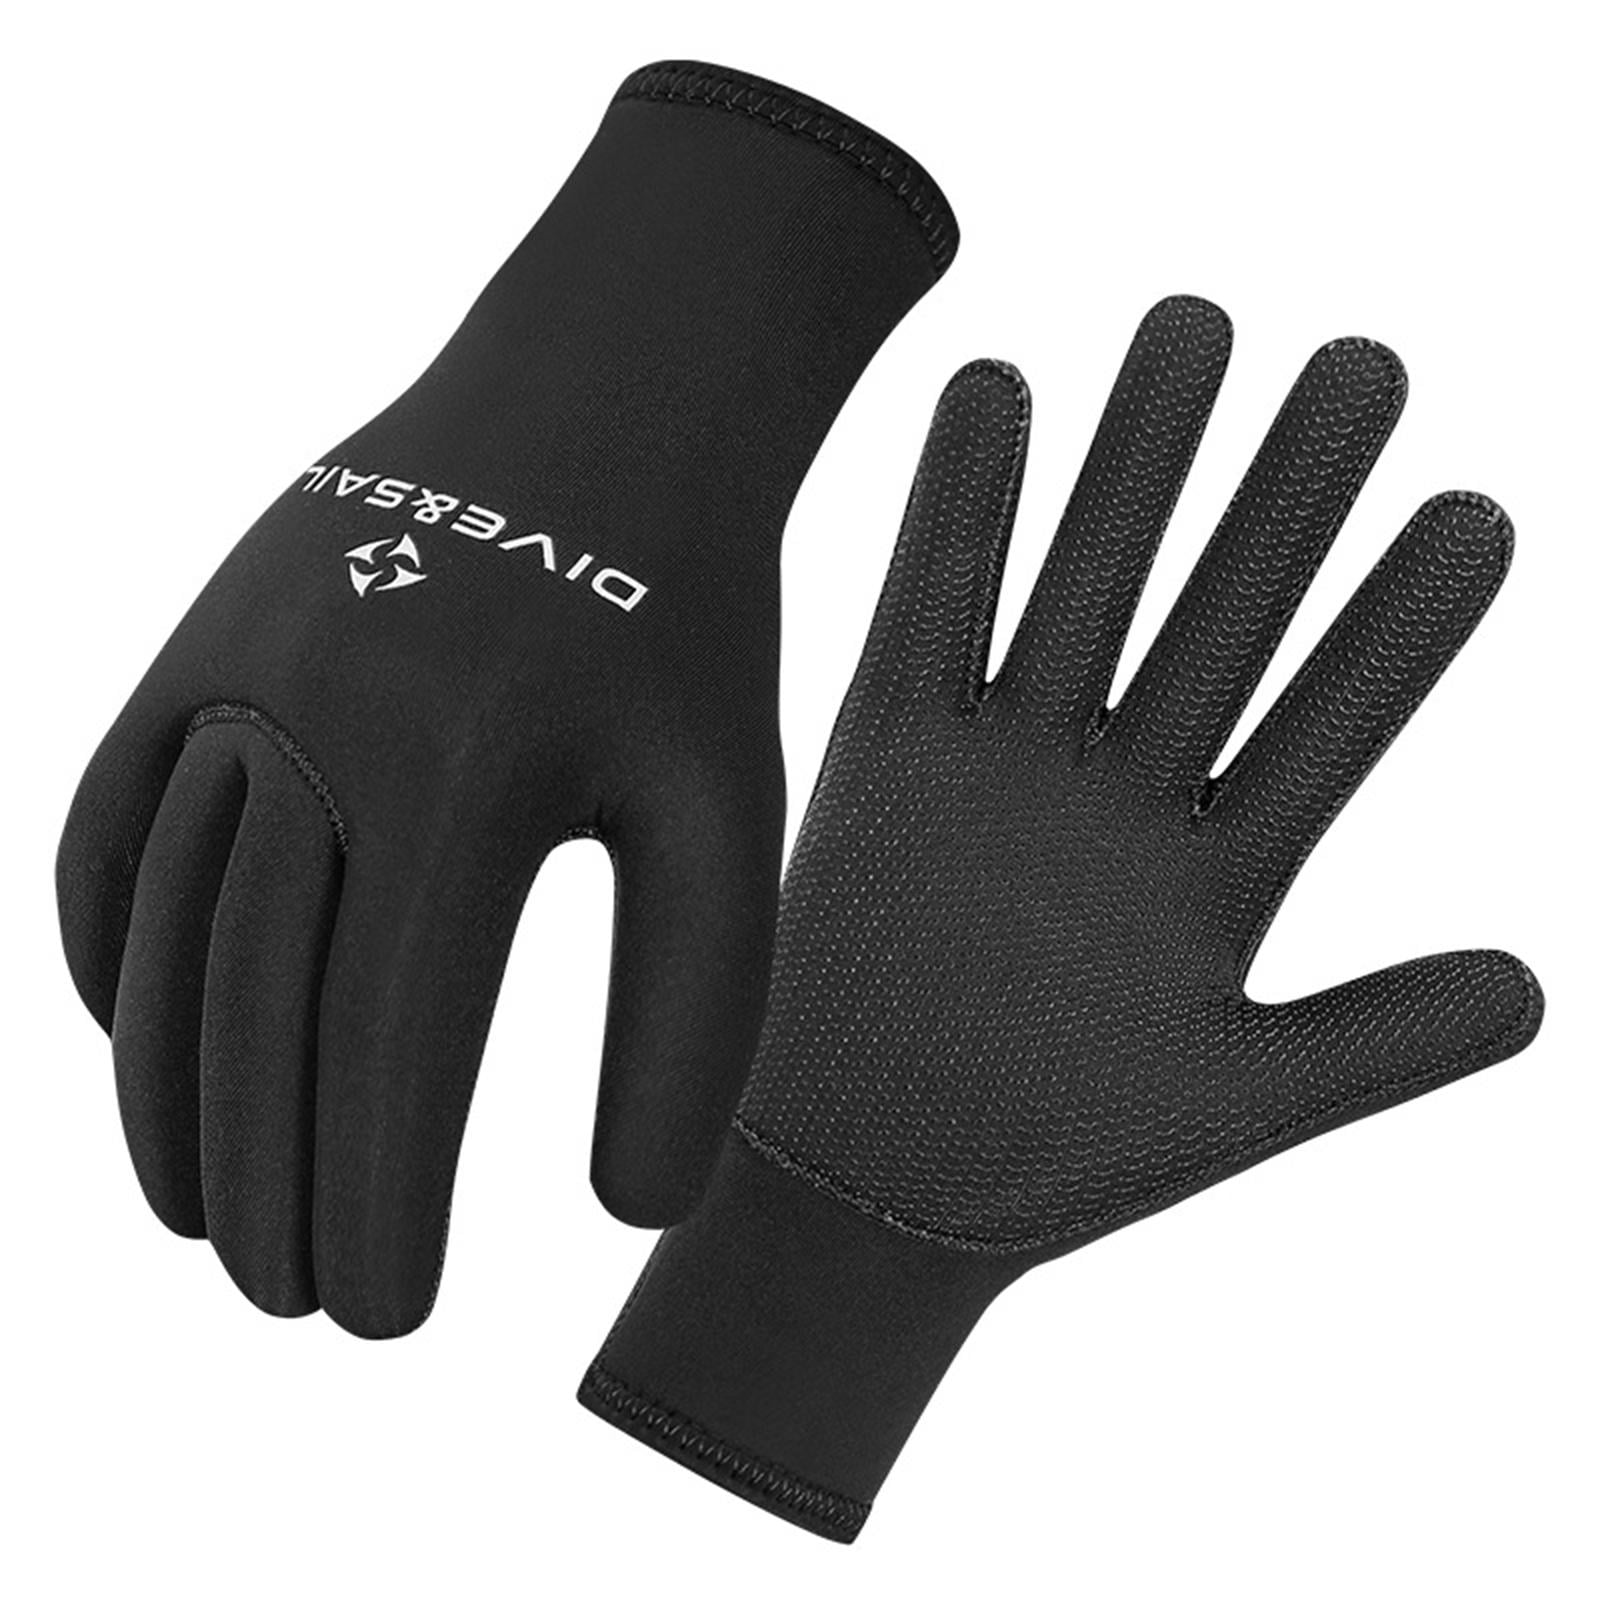 5MM Neoprene Protective Diving Snorkeling Swimming Non-slip Surfing Mits Gloves 